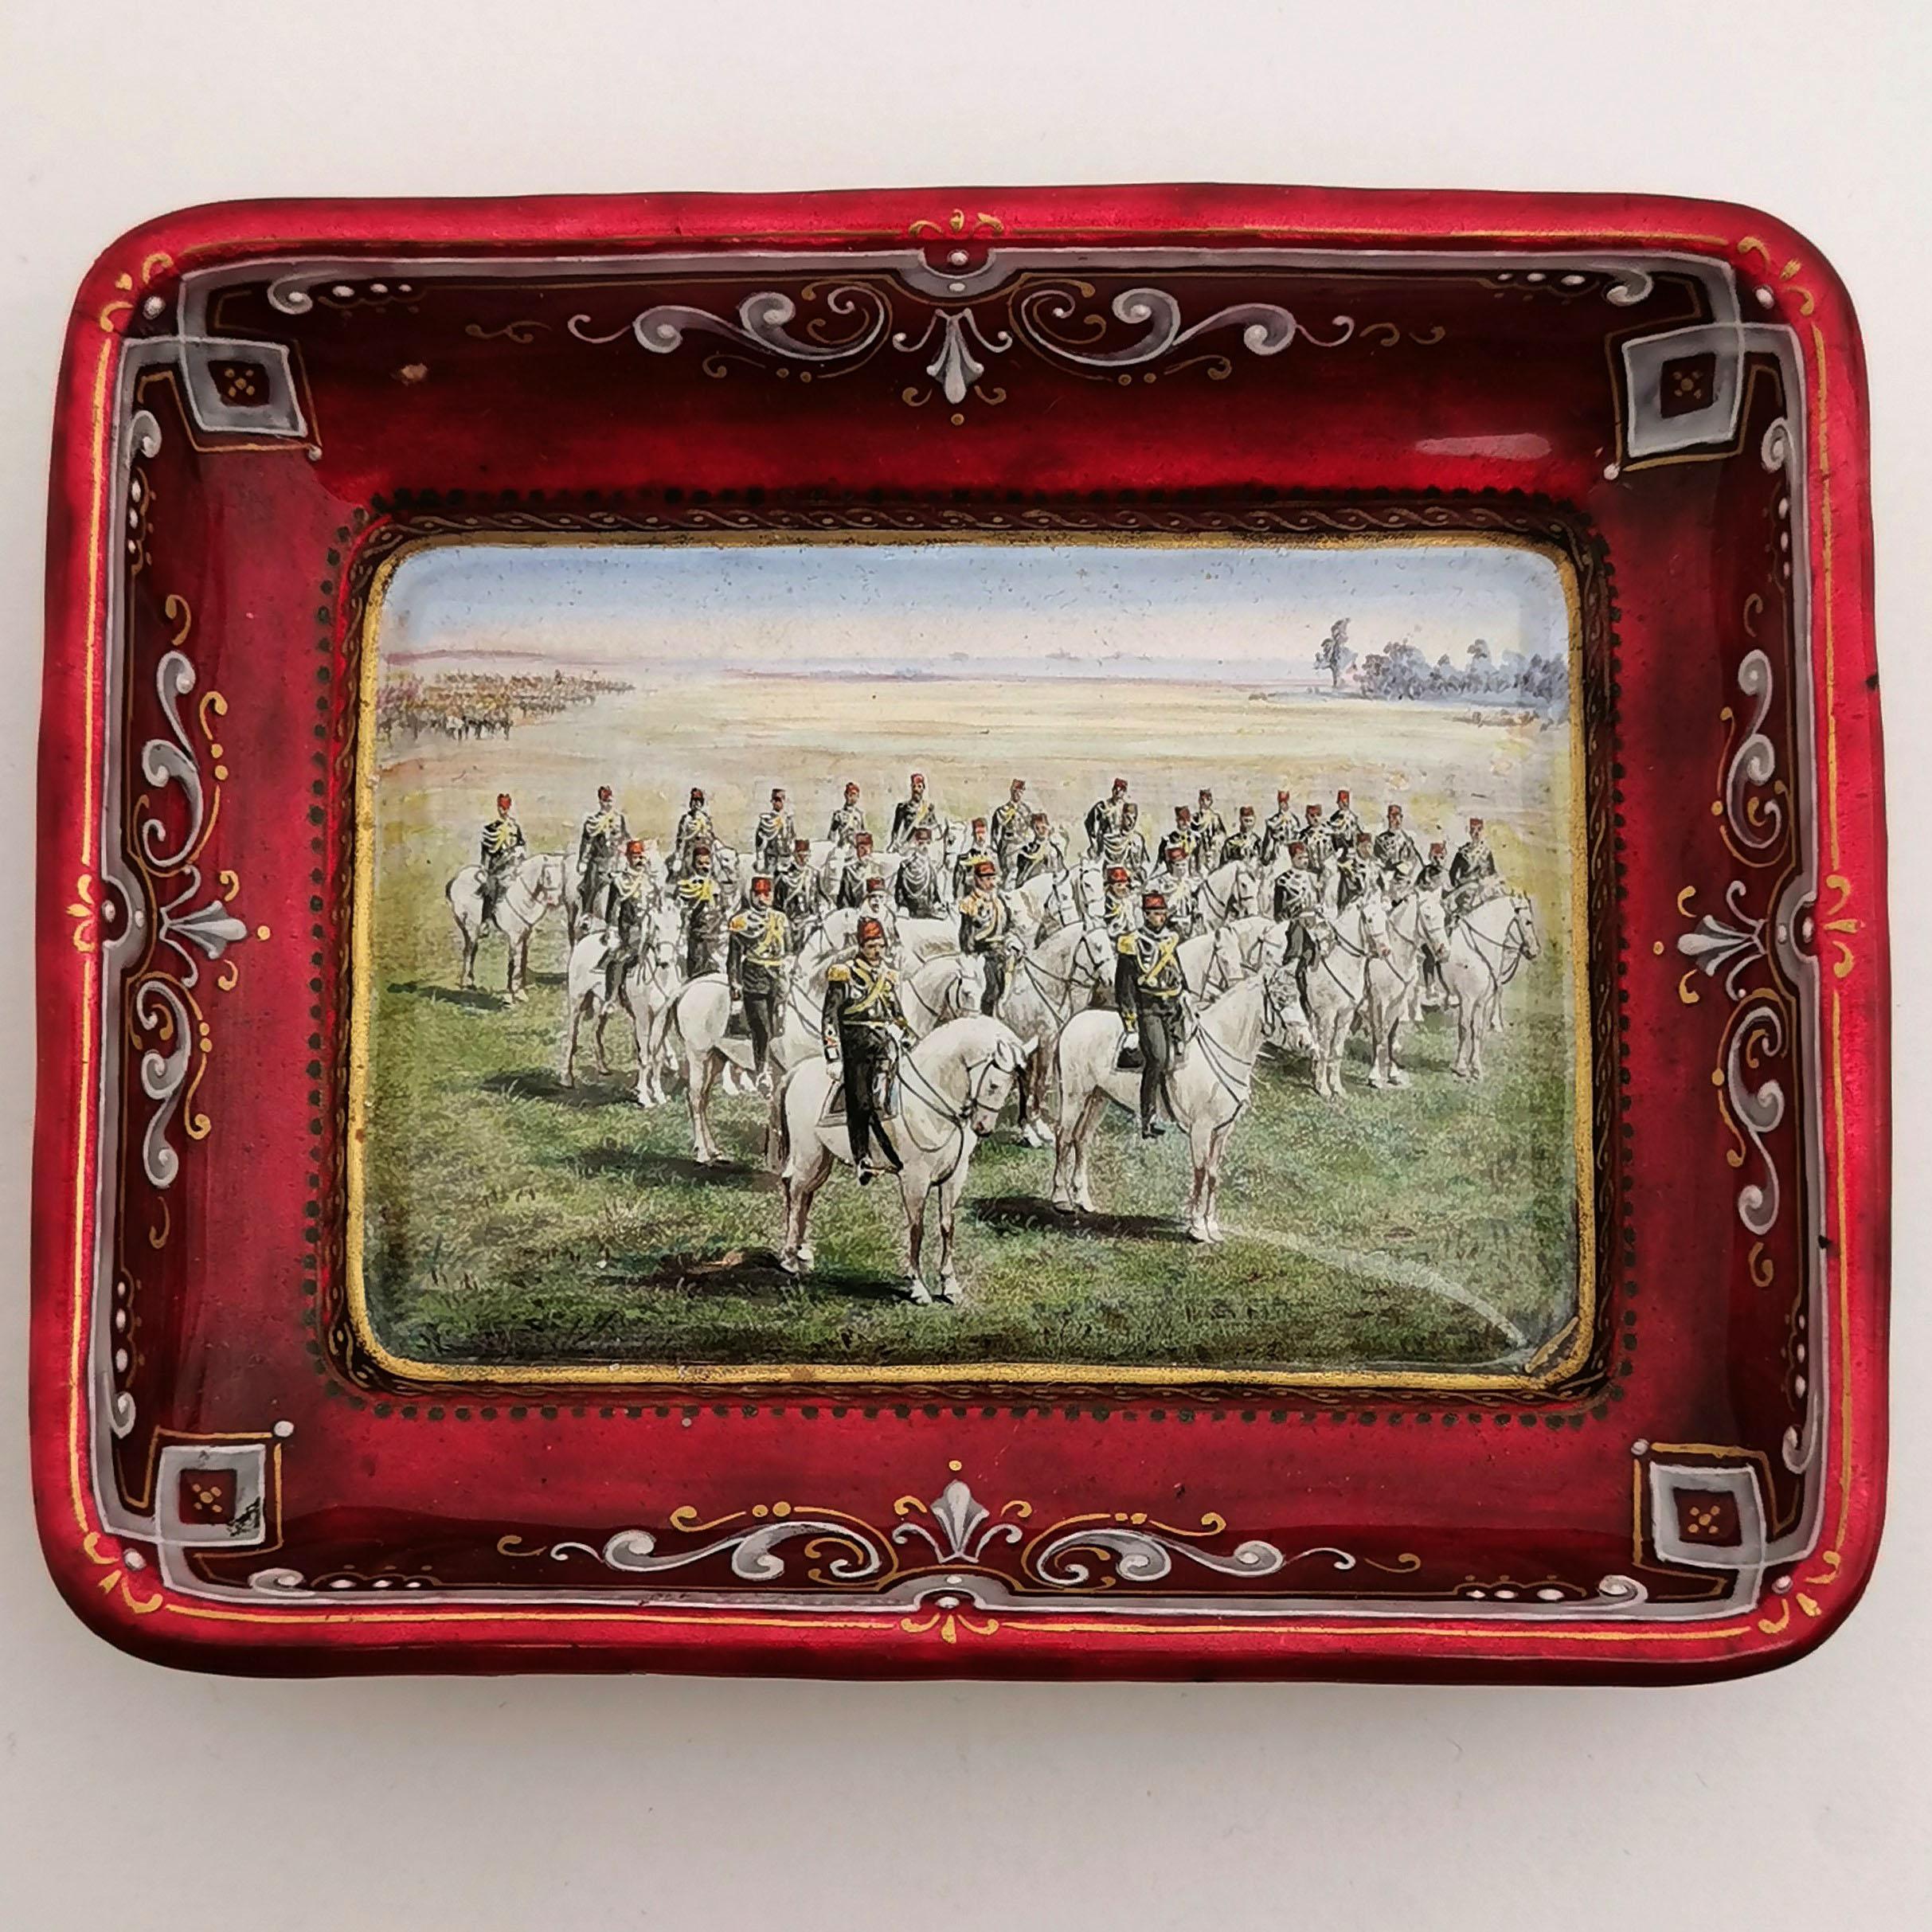 A lovely Antique Viennese Enamel Dish / Pin Tray featuring a wonderful enamel design showing a Turkish Army on Horse Back in a field. The sides of the Tray and the exterior are covered in a rich iridescent red with a white and gold border on the